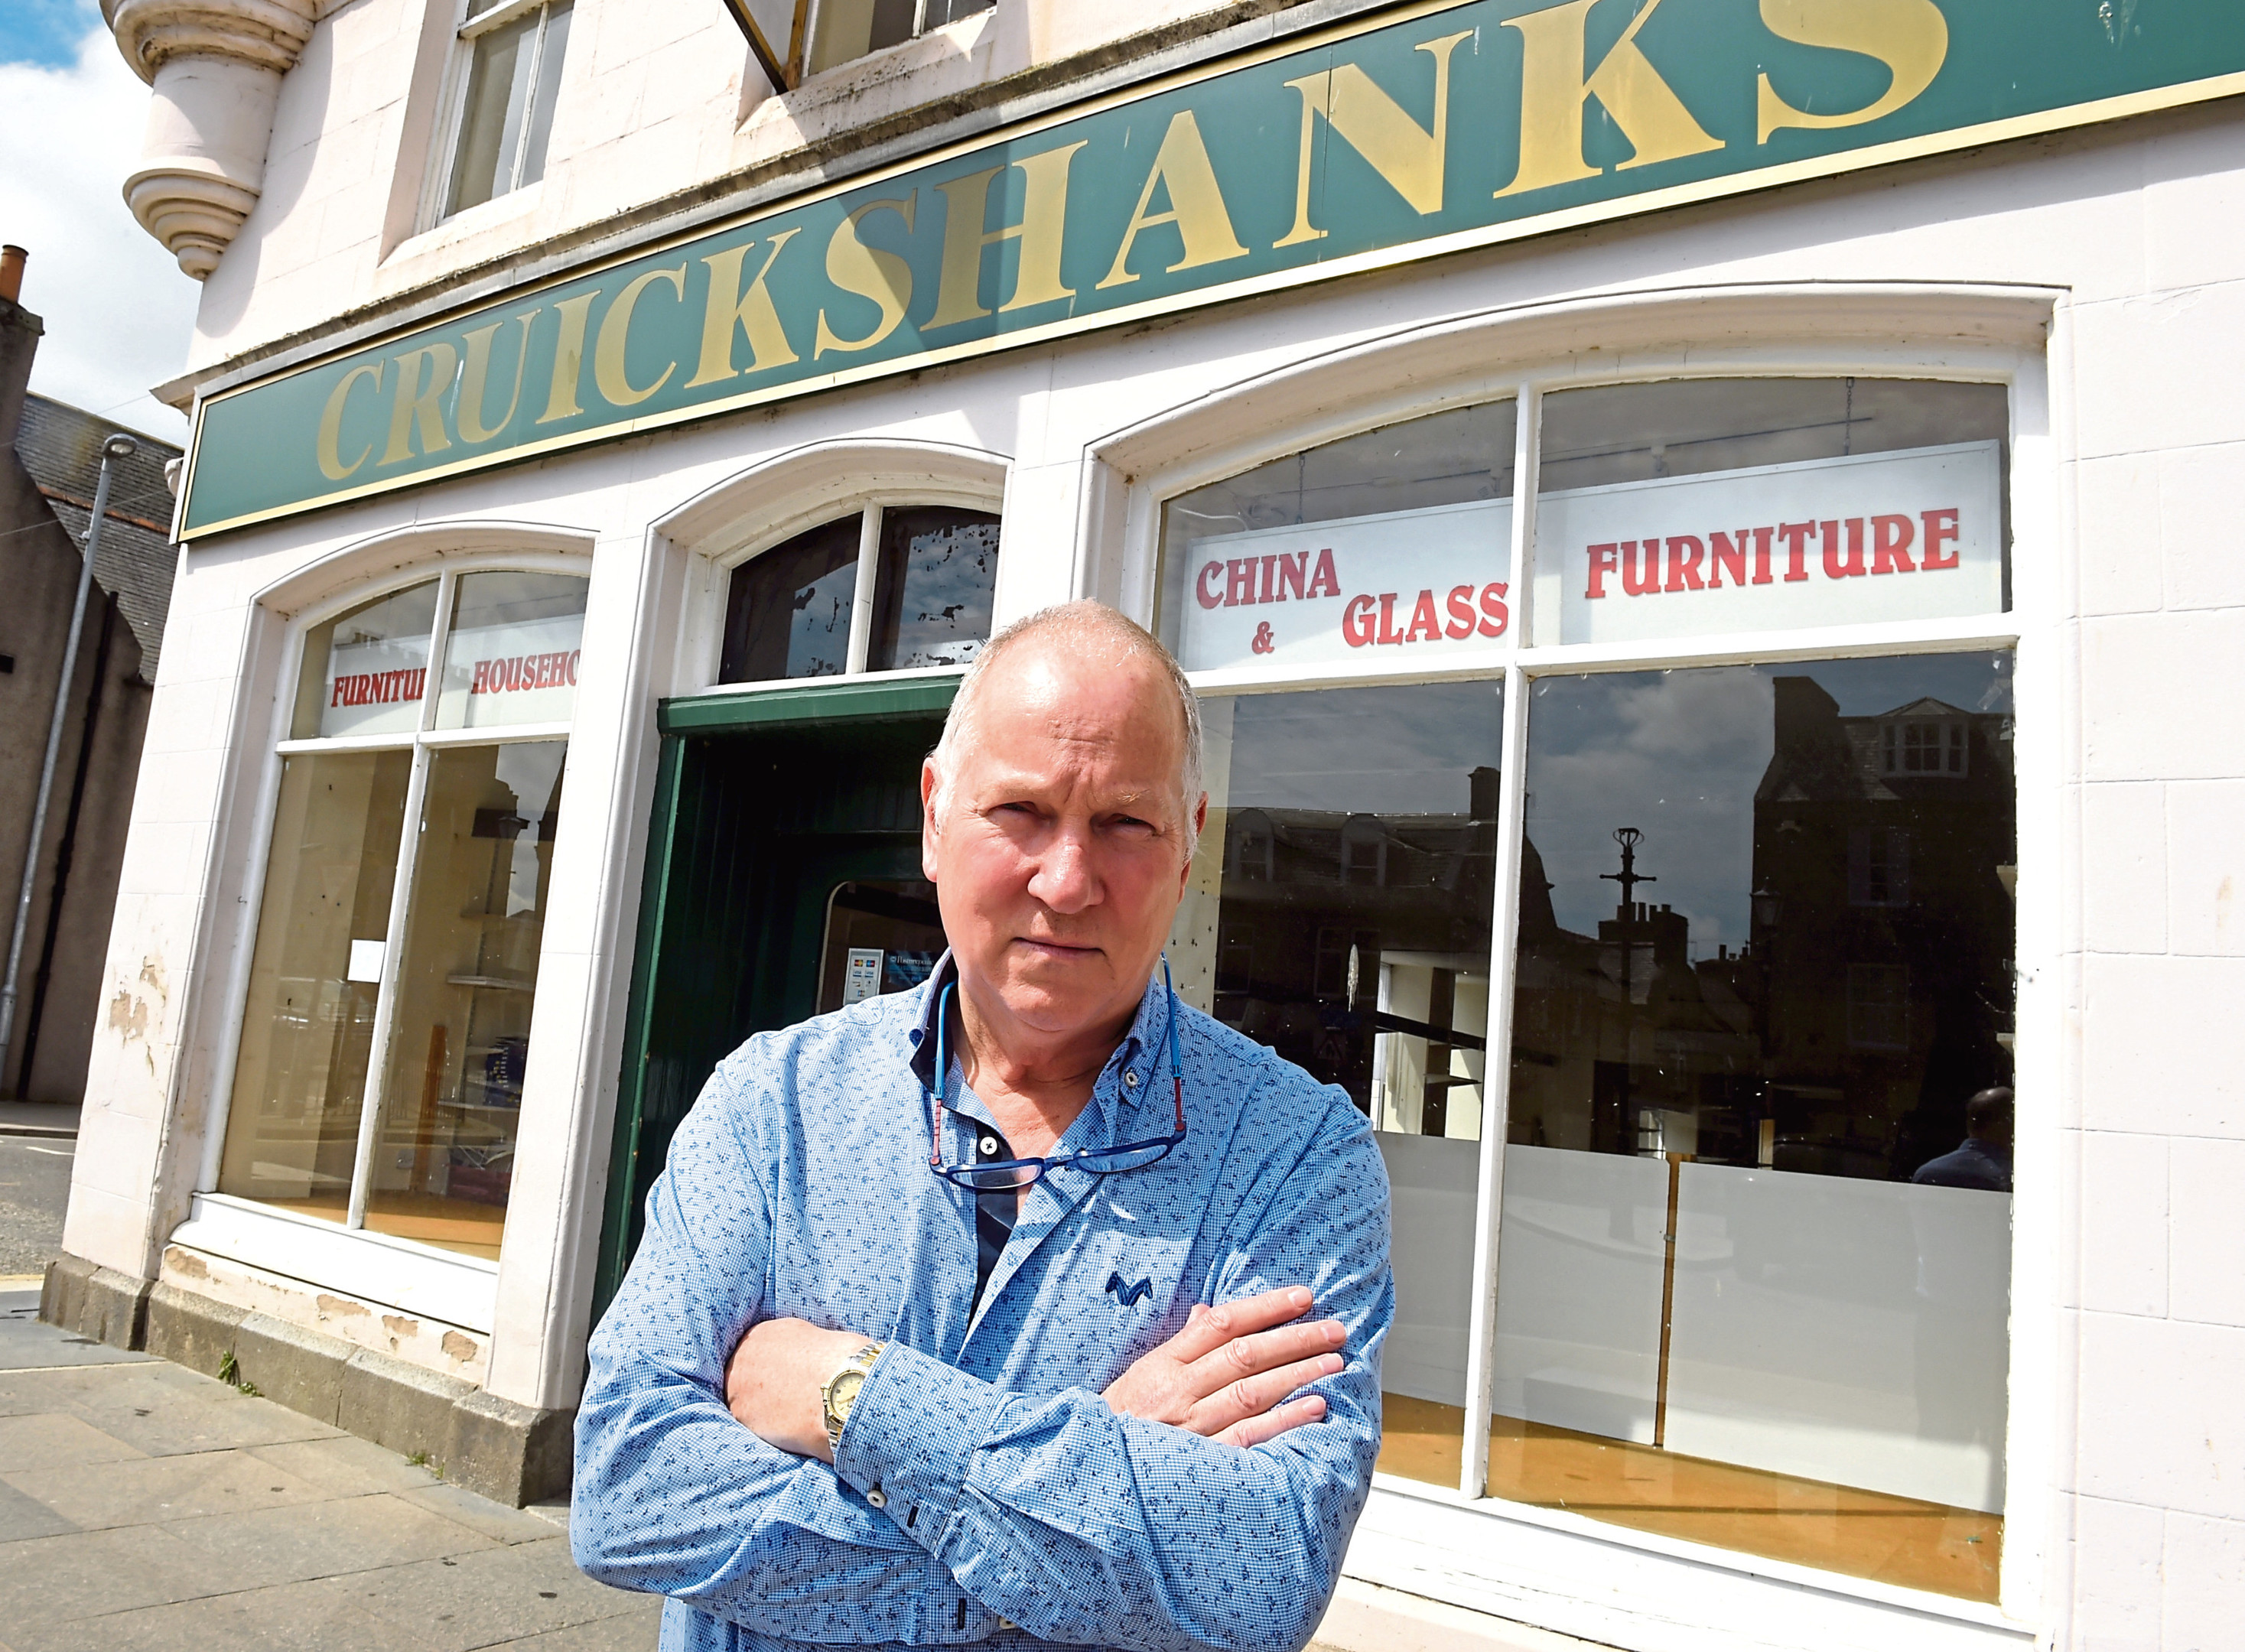 Michael Brodie, selling his furniture shops pictured at Cruickshanks Huntly.
Picture by Jim Irvine  29-5-18